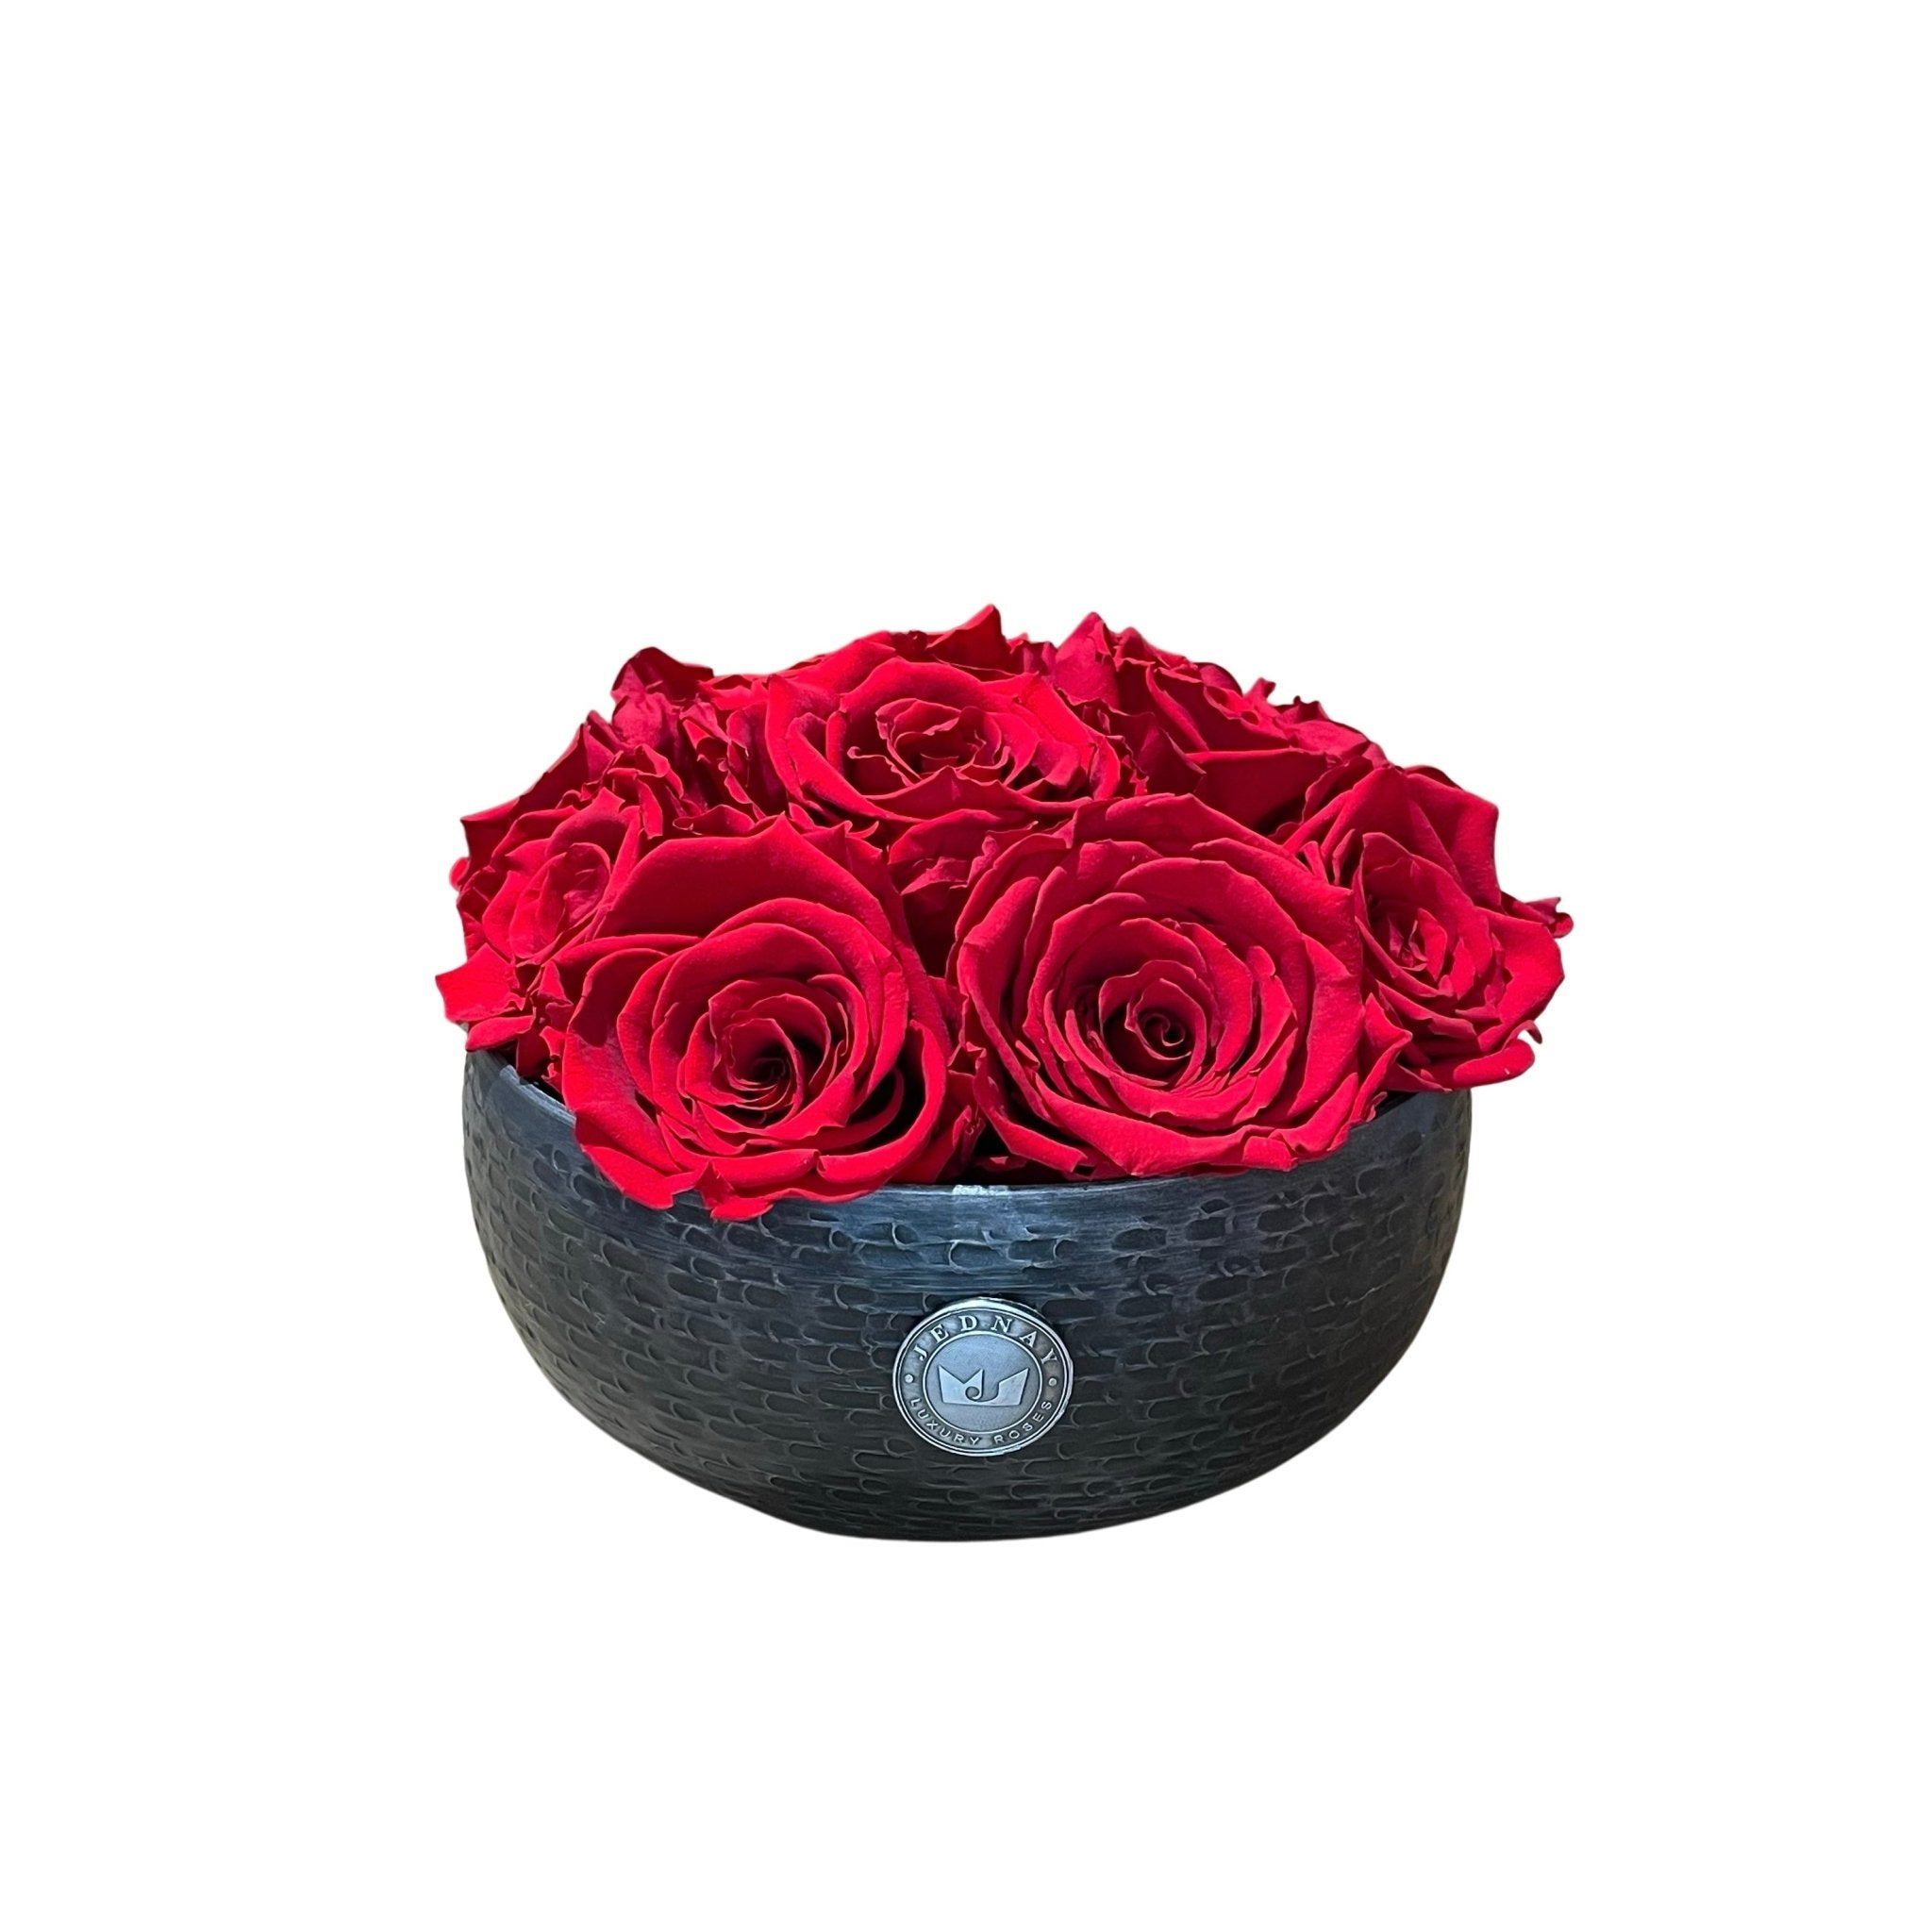 The Knightsbridge - Classic Red Forever Roses - Pewter Bowl - Jednay Roses